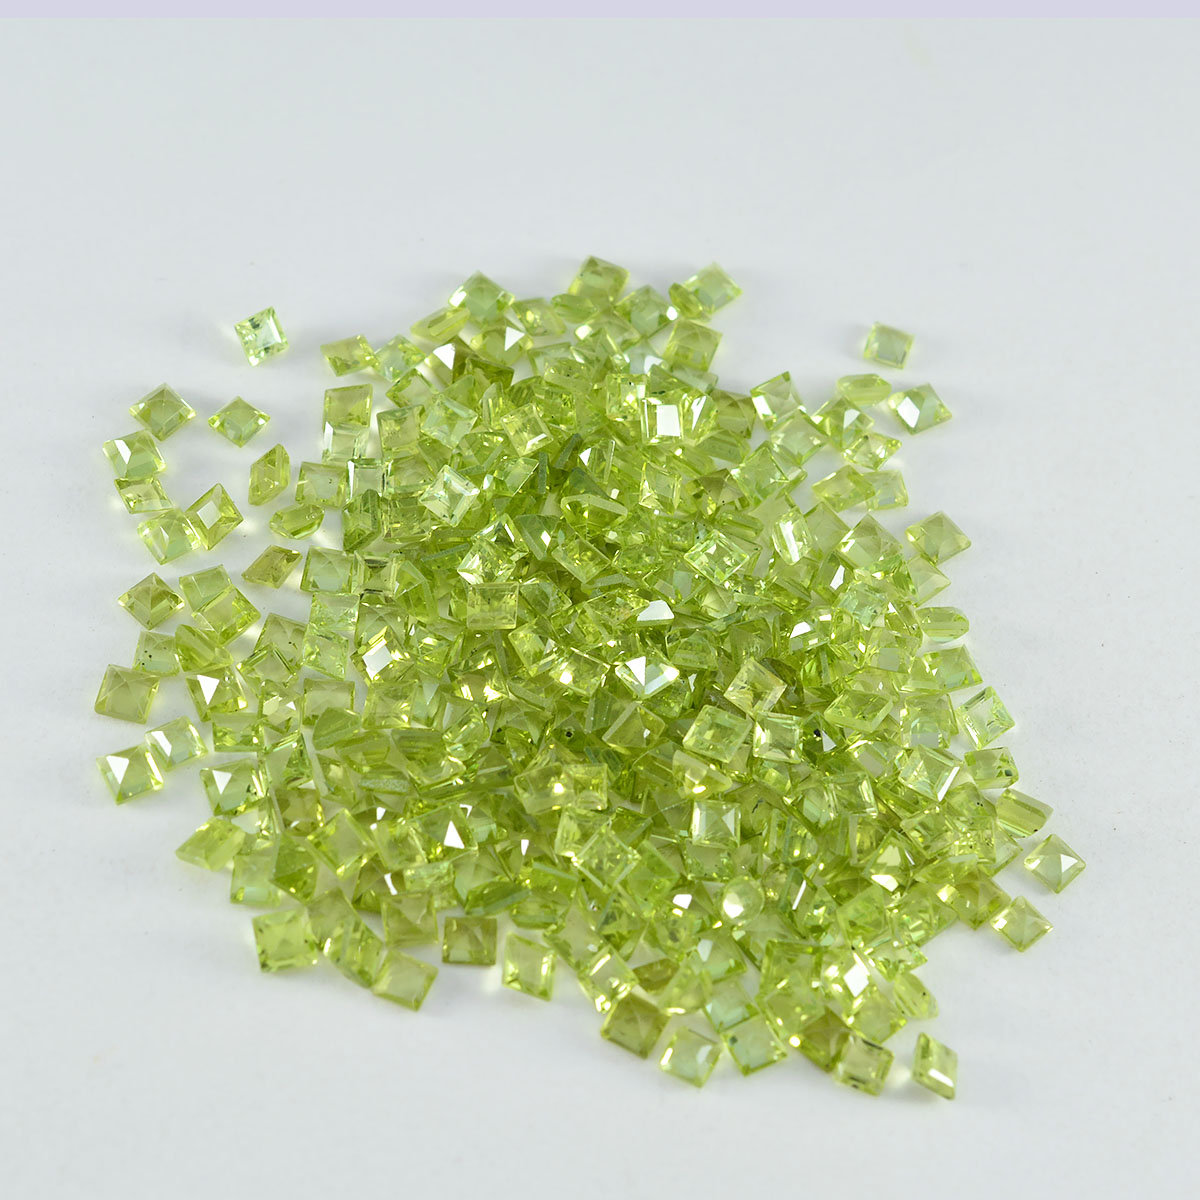 Riyogems 1PC Genuine Green Peridot Faceted 3X3 mm Square Shape handsome Quality Loose Gems